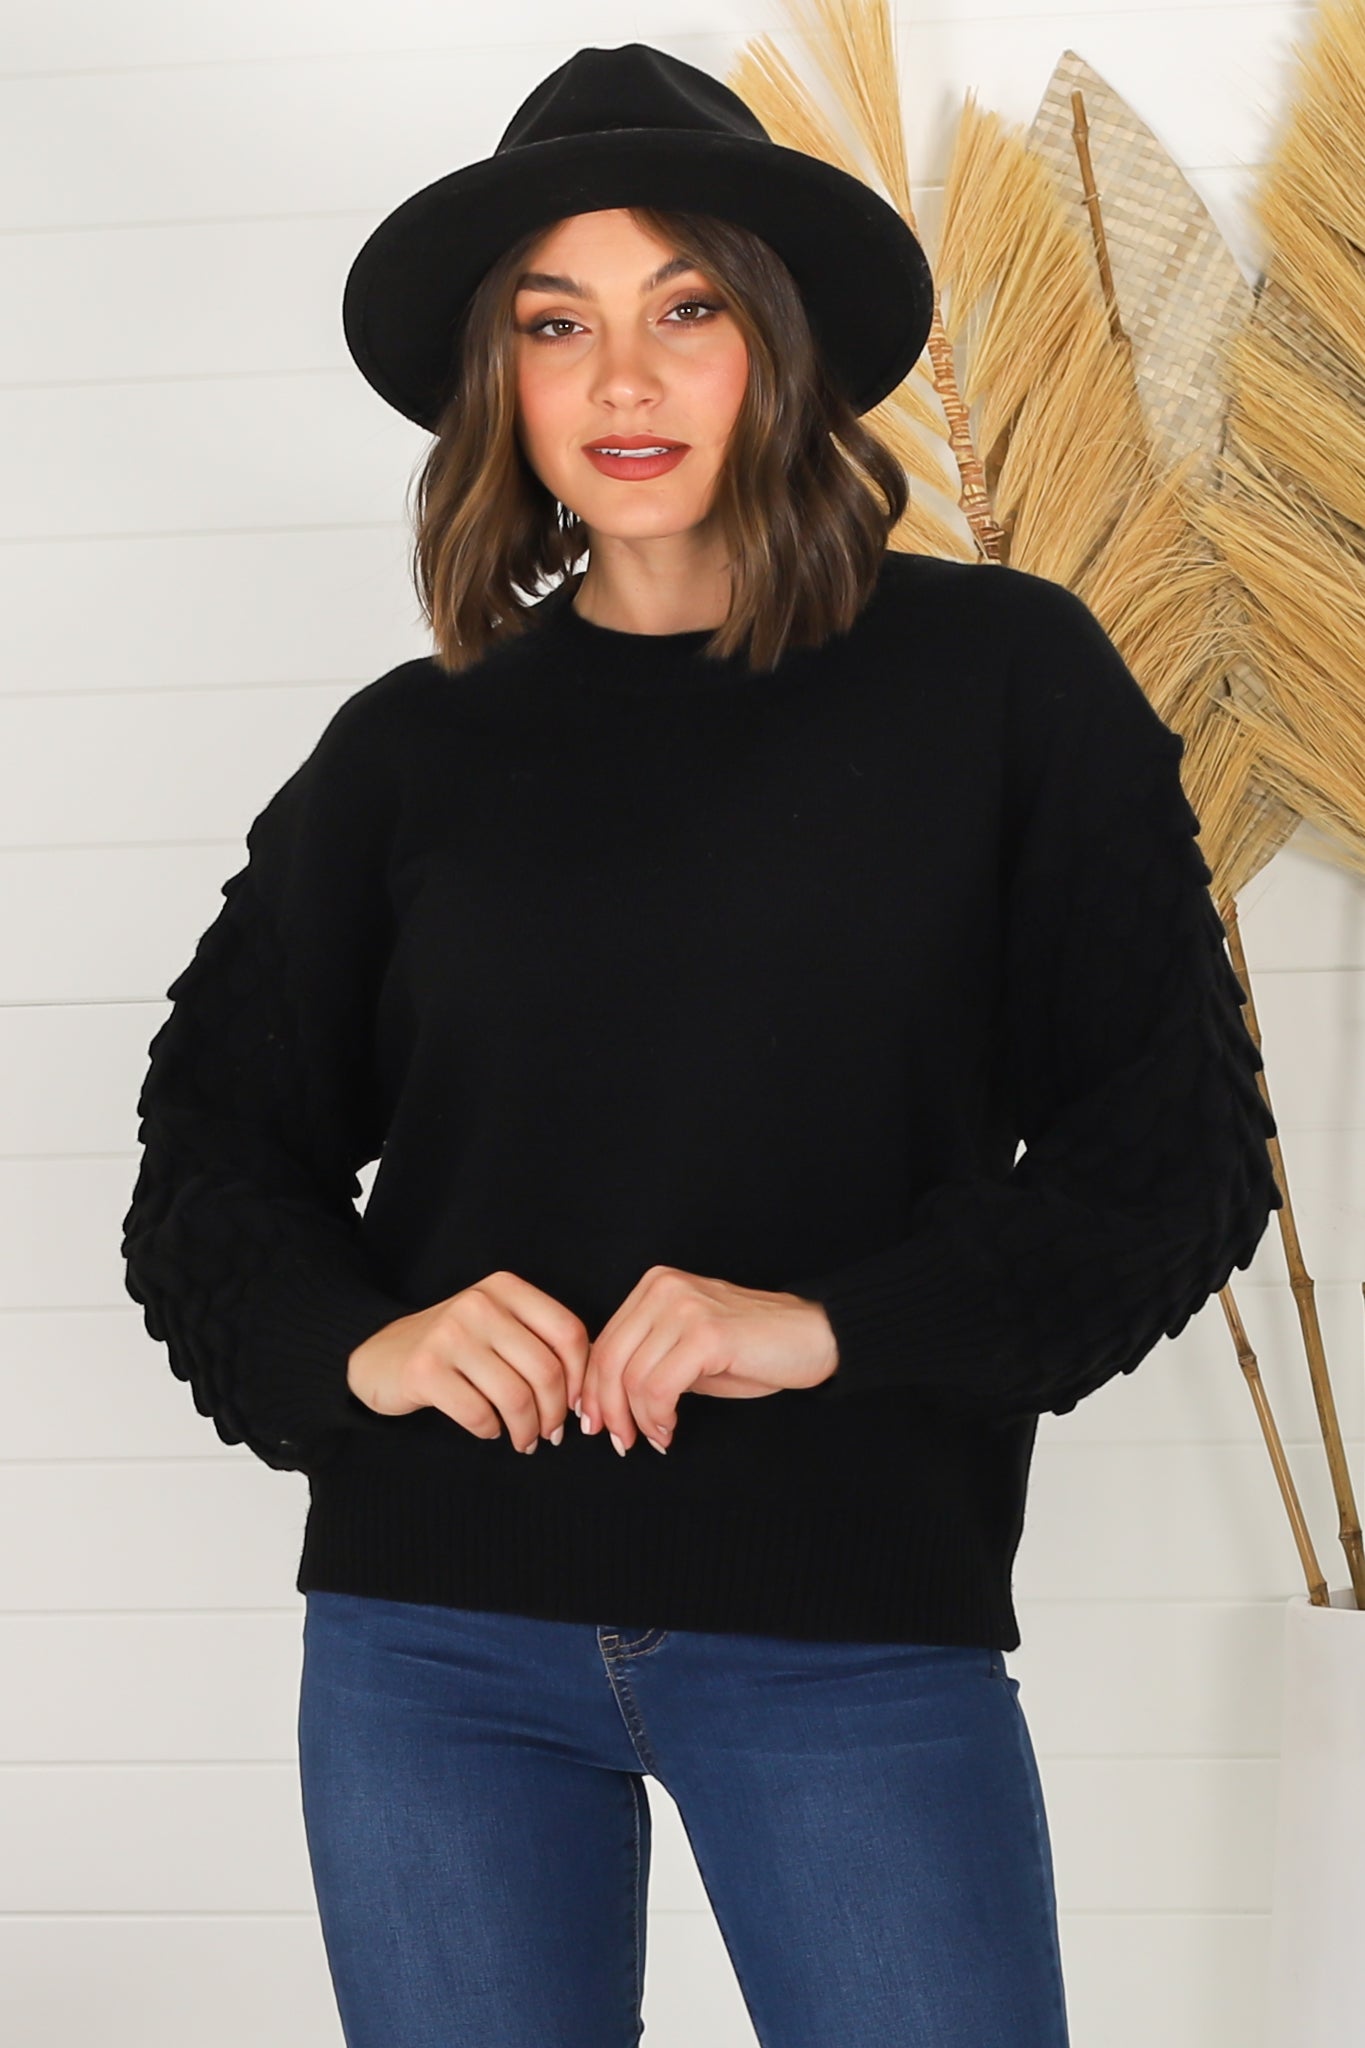 Amanda Jumper - Crew Neck with Mermaid Scale Balloon Sleeve Knit in Black